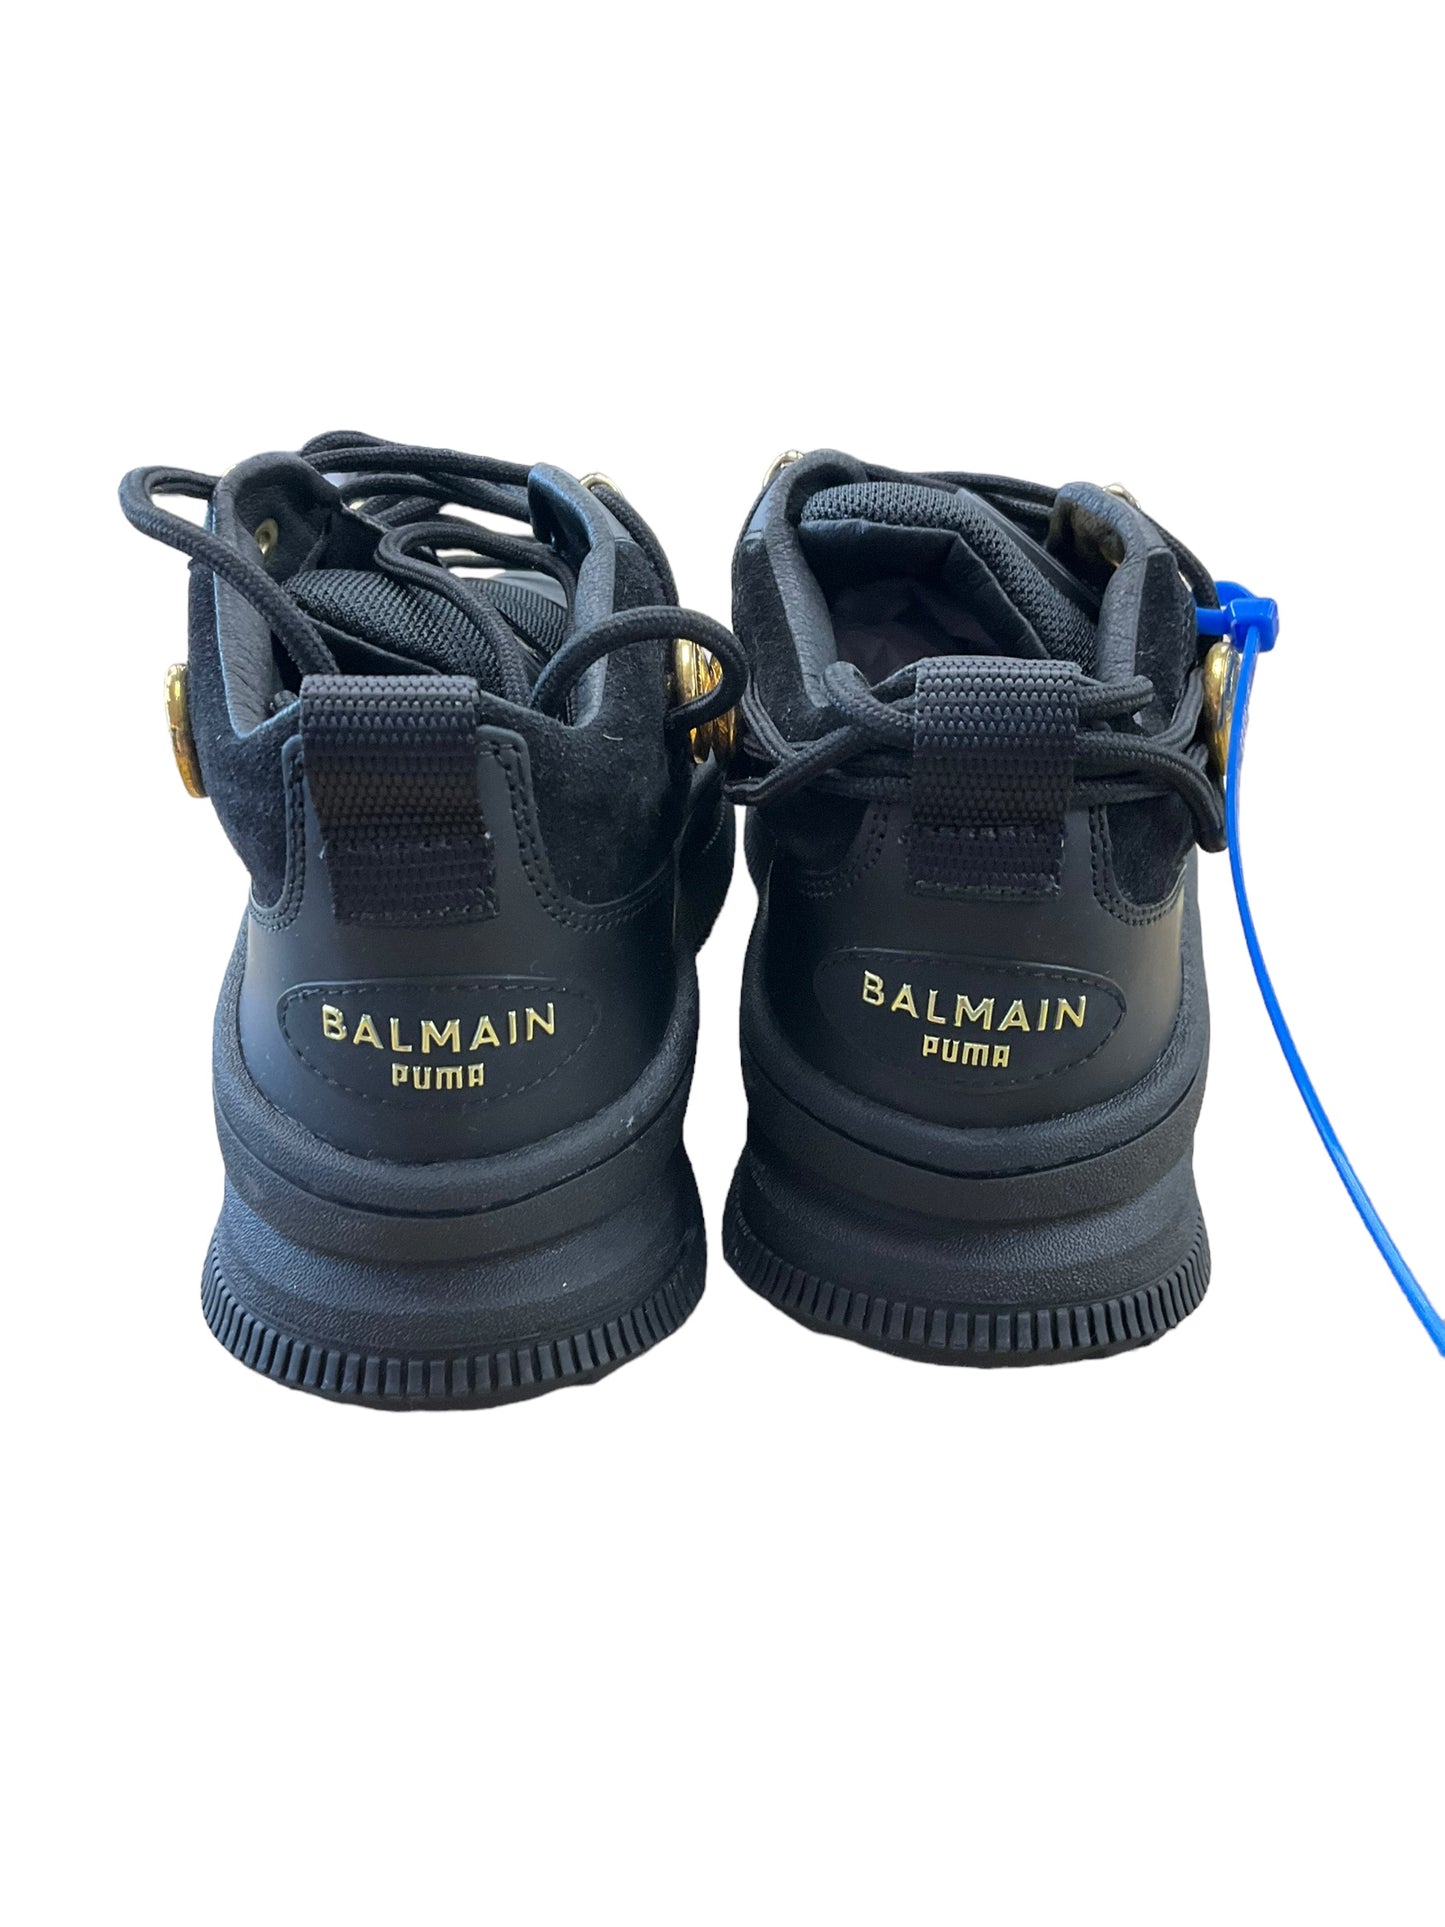 Shoes Sneakers By Balmain  Size: 6.5